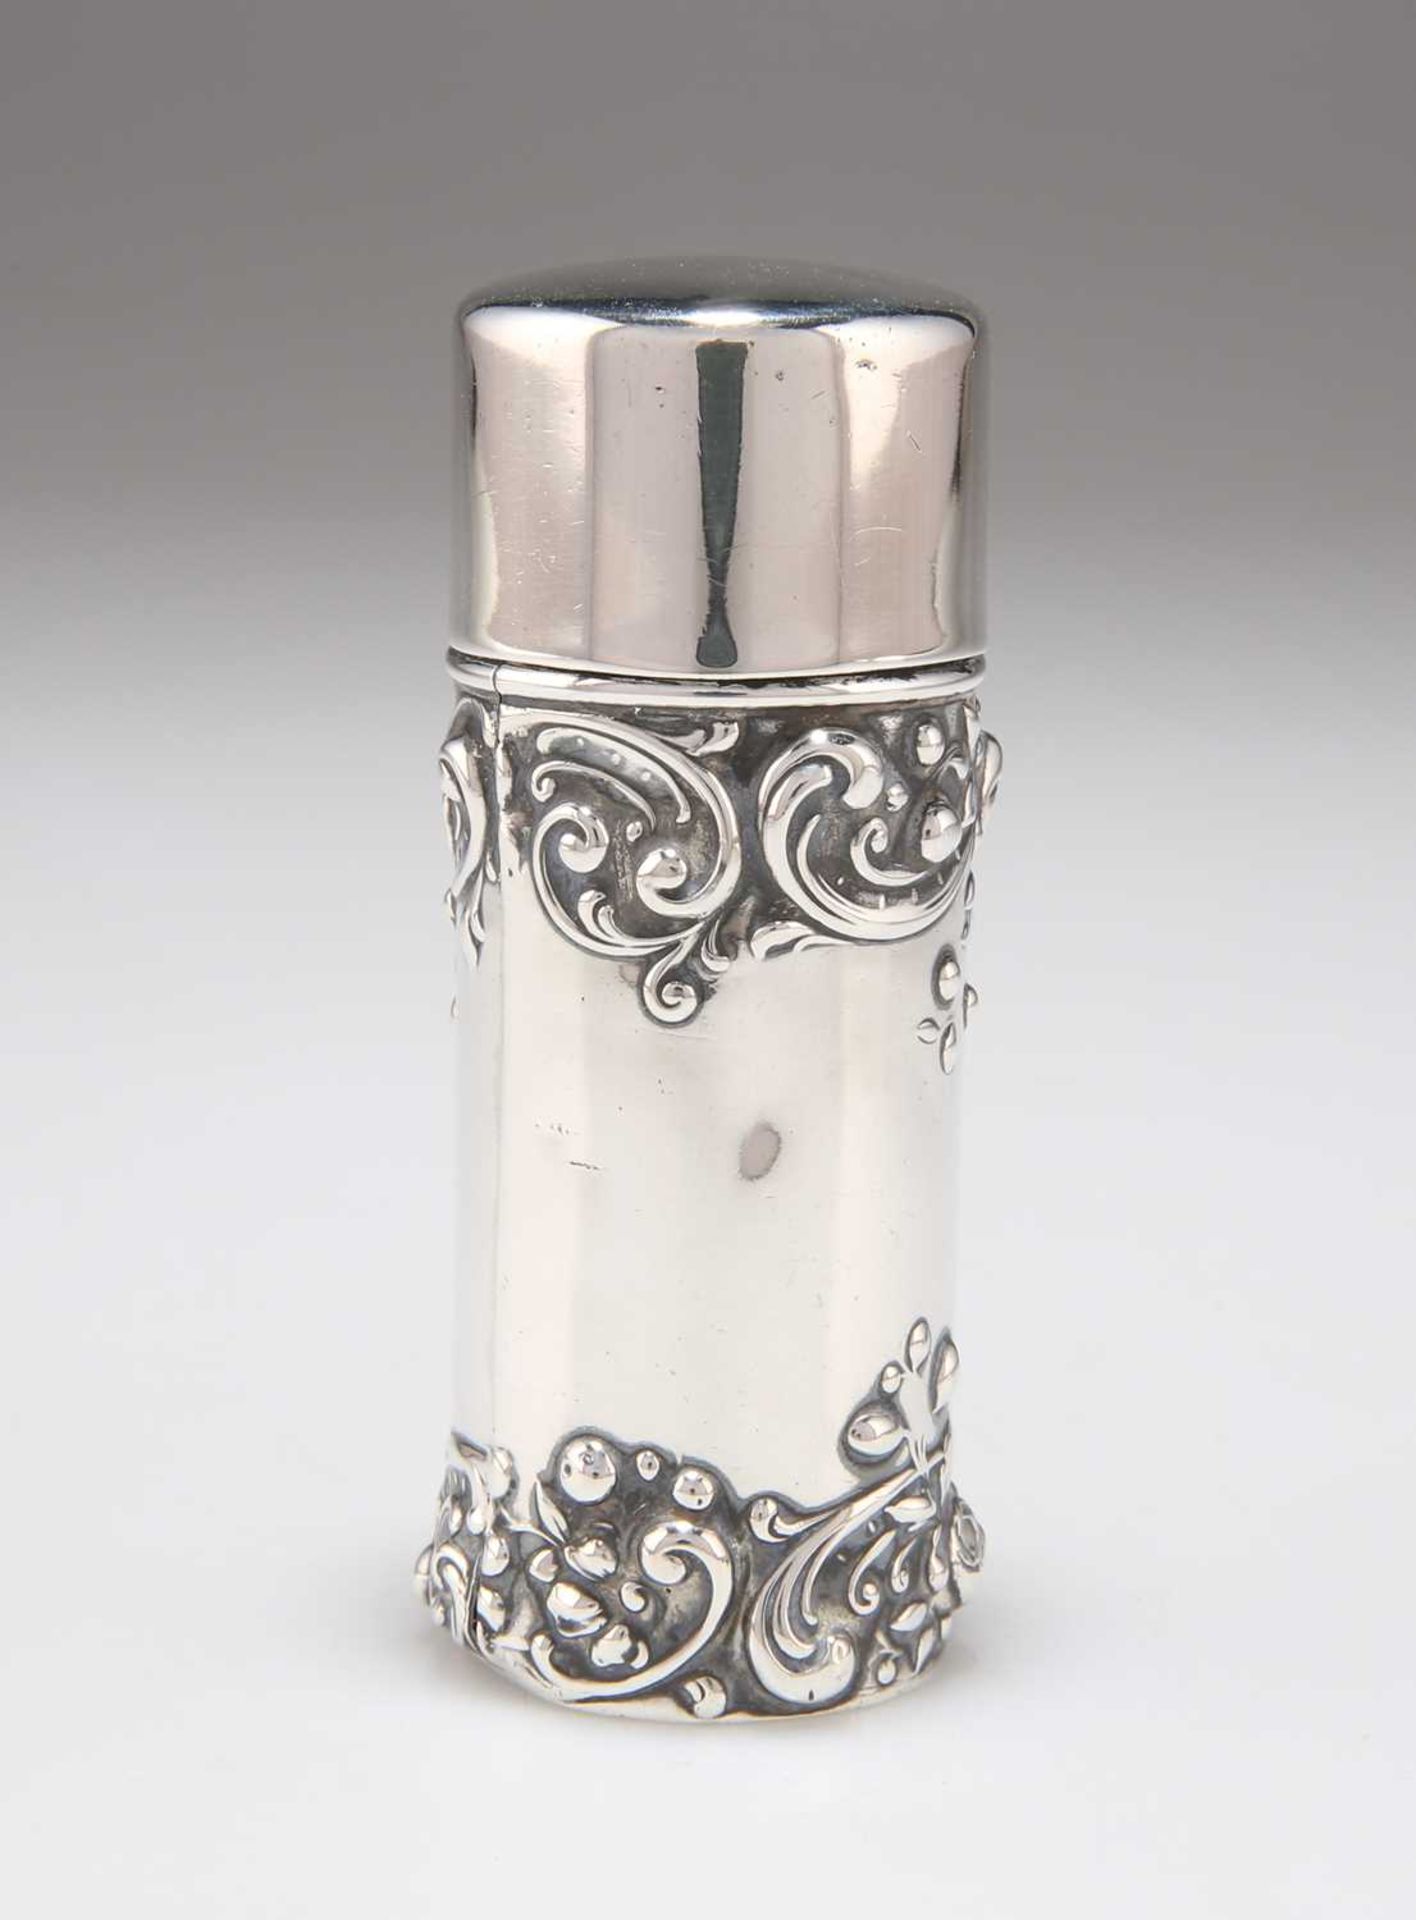 AN ART NOUVEAU AMERICAN STERLING SILVER JAR AND COVER, LATE 19TH CENTURY - Image 2 of 3